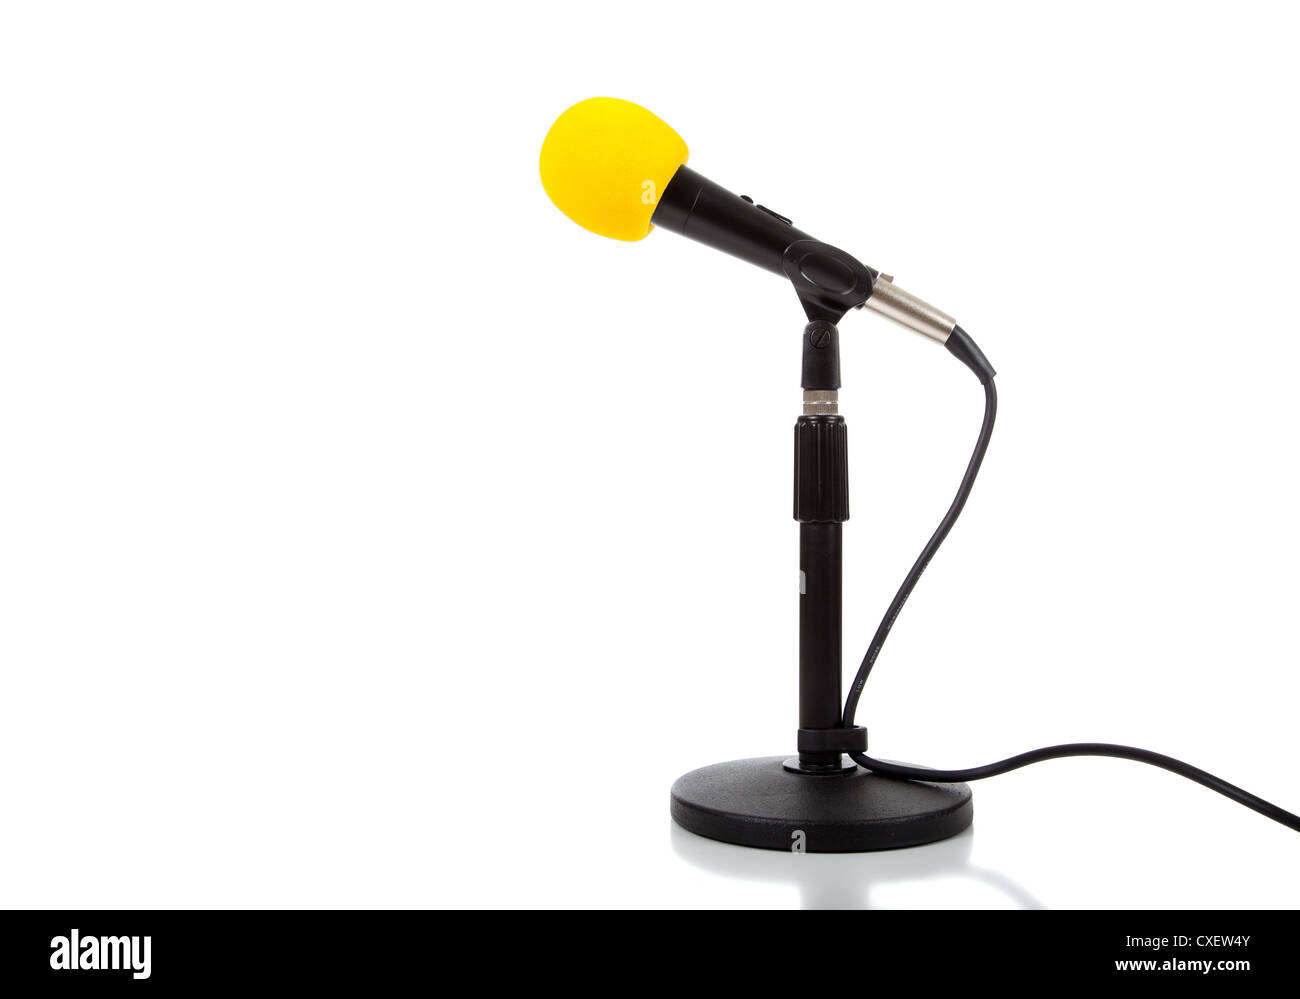 Microphone on a small black stand with a yellow cover Stock Photo